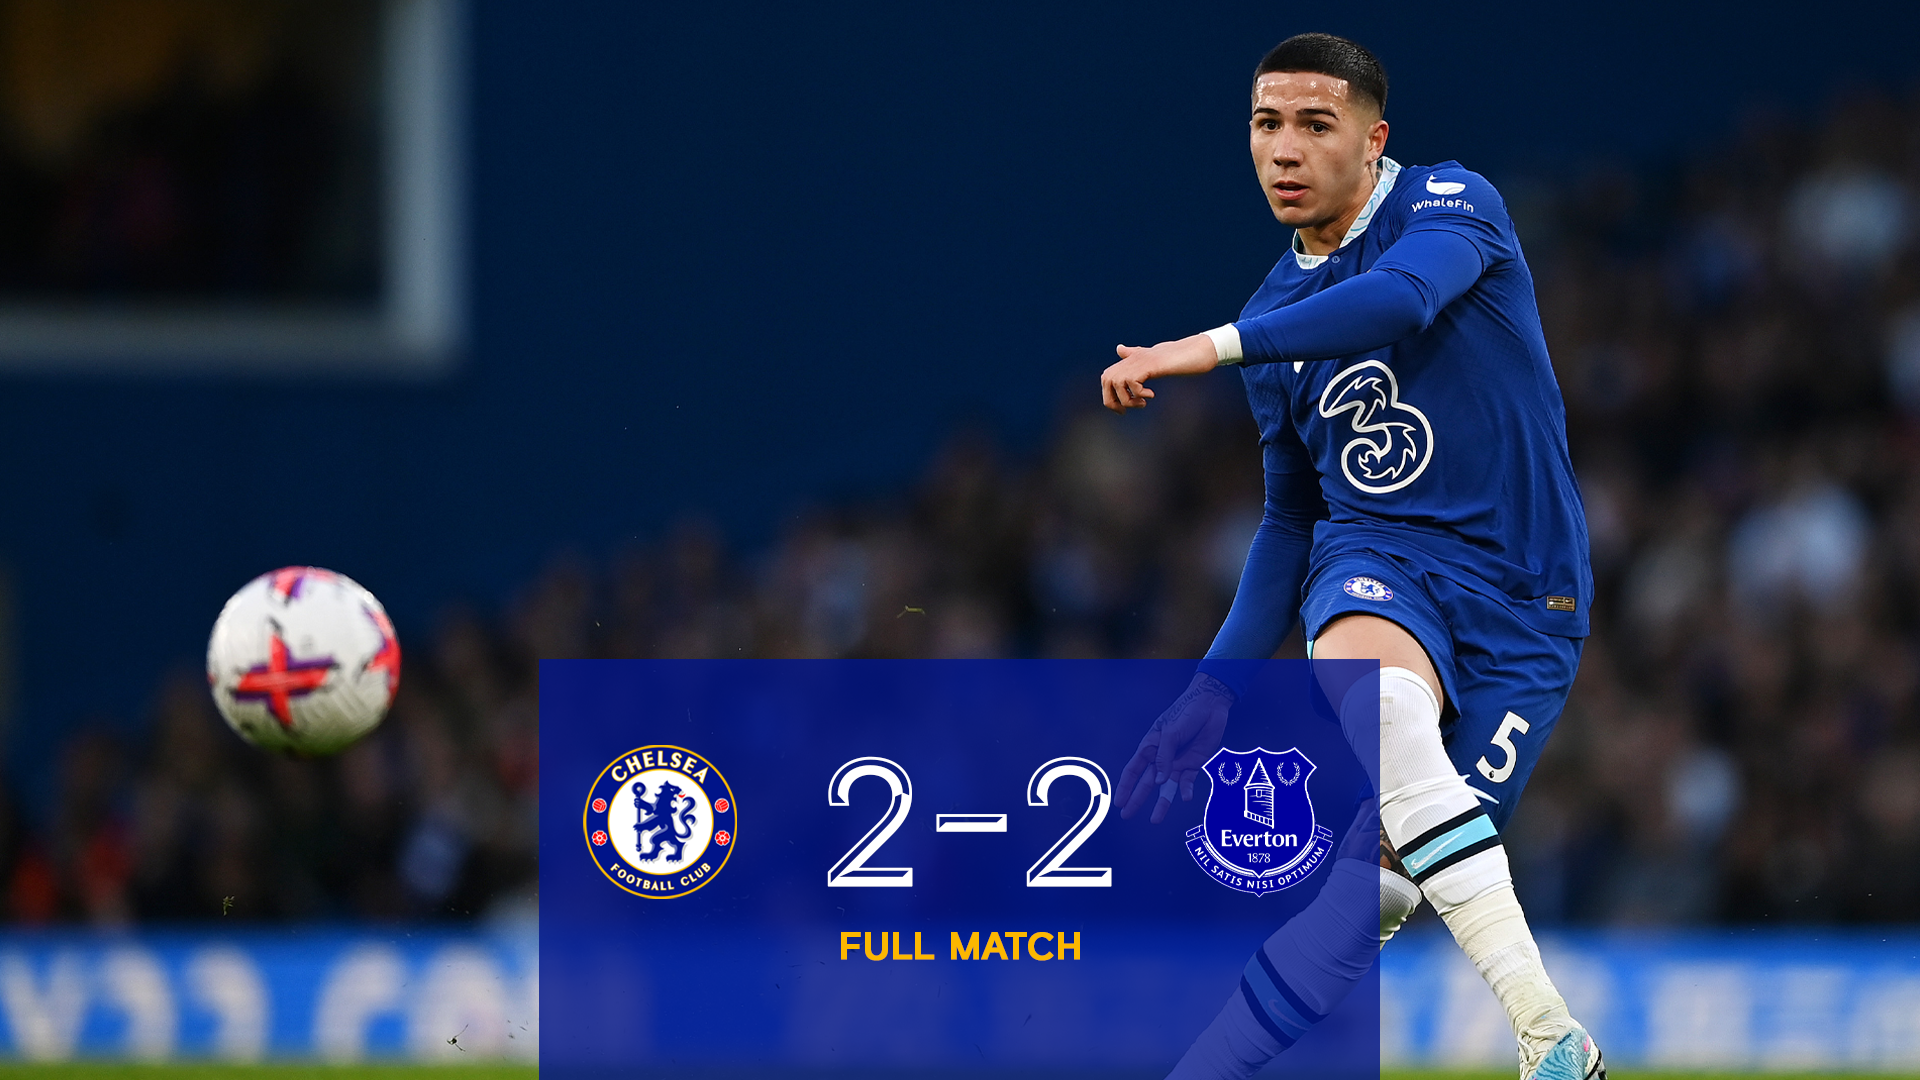 Full Match Chelsea 2-2 Everton Video Official Site Chelsea Football Club